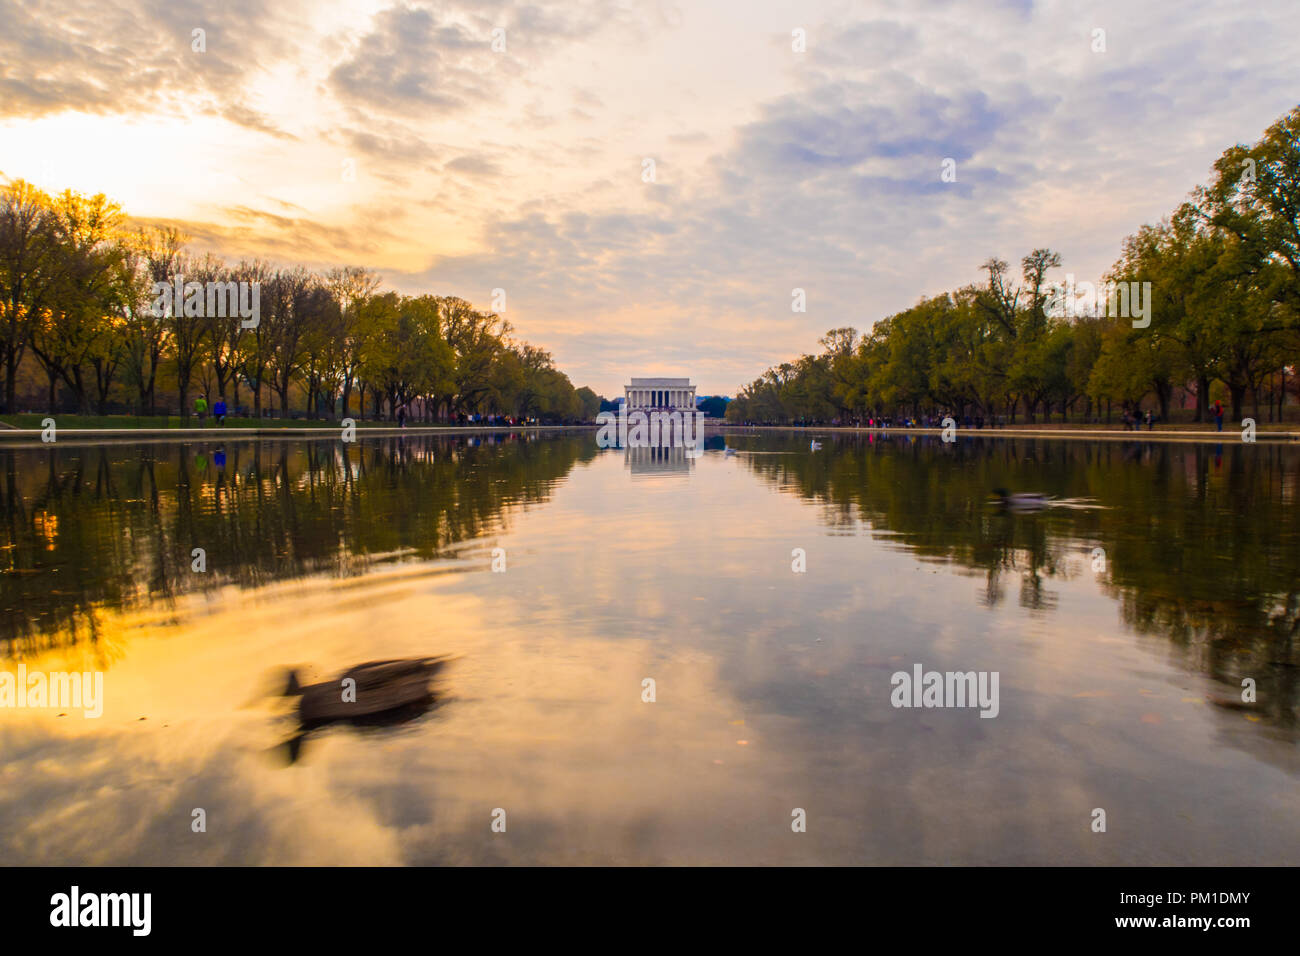 The Abraham Lincoln Memorial from across the Reflecting pool.  Washington DC, USA.  A view of the Lincoln Memorial from across the Reflecting pool. Stock Photo